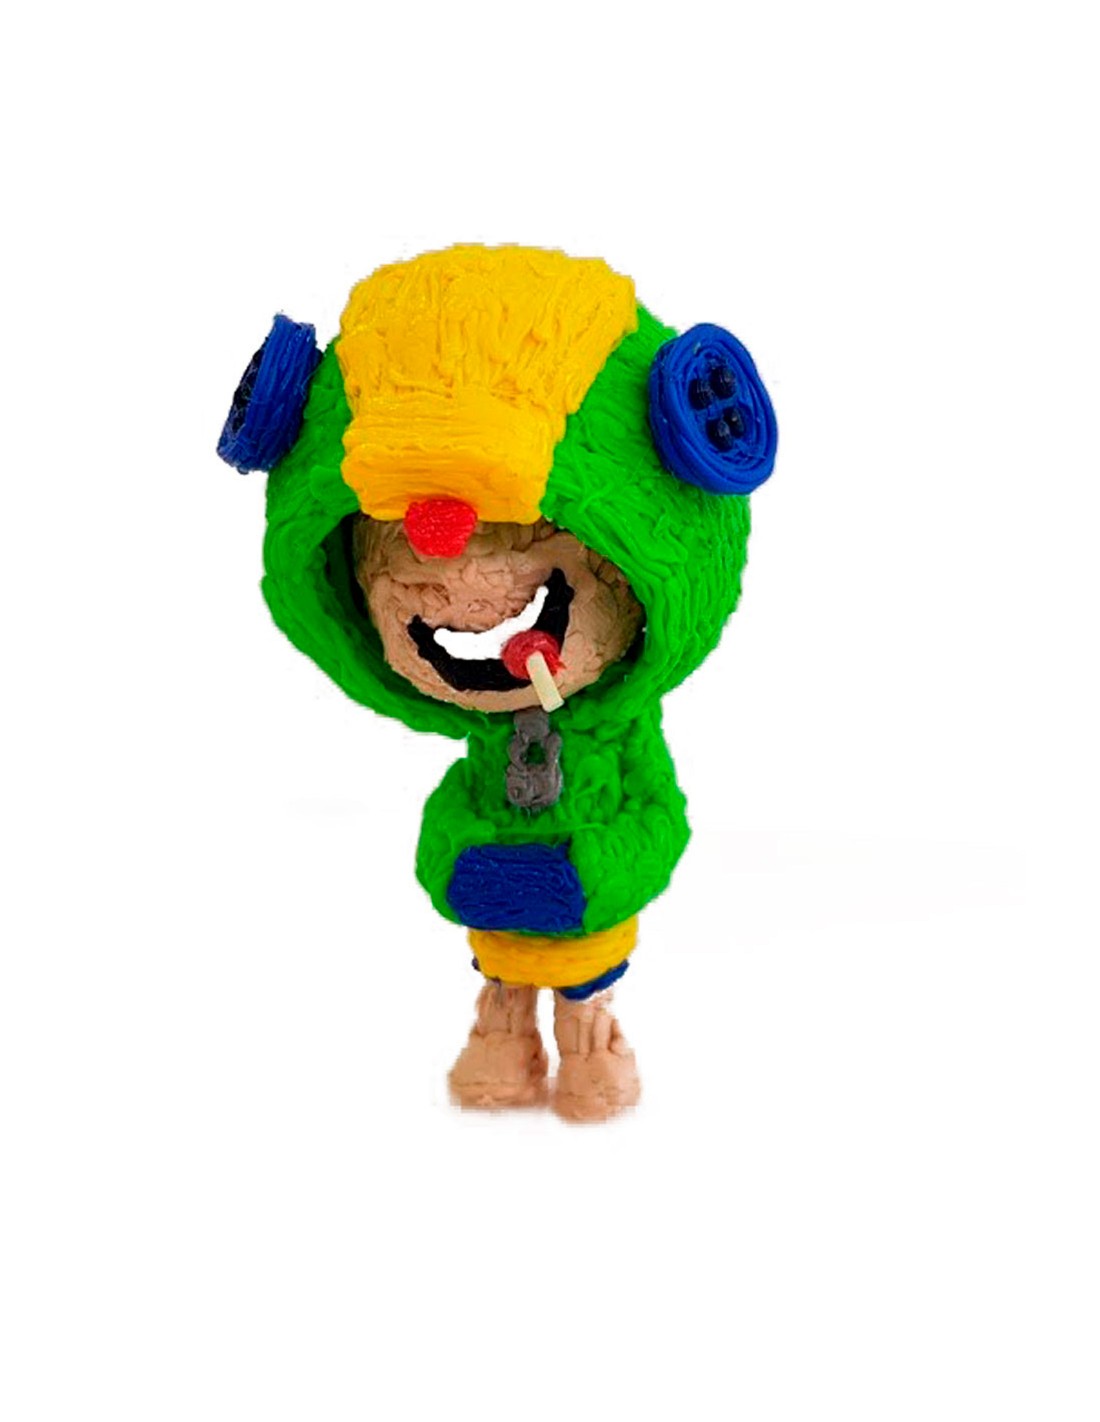 Leon From Brawl Stars Free Template For A 3d Pen - brawl stars leon for free